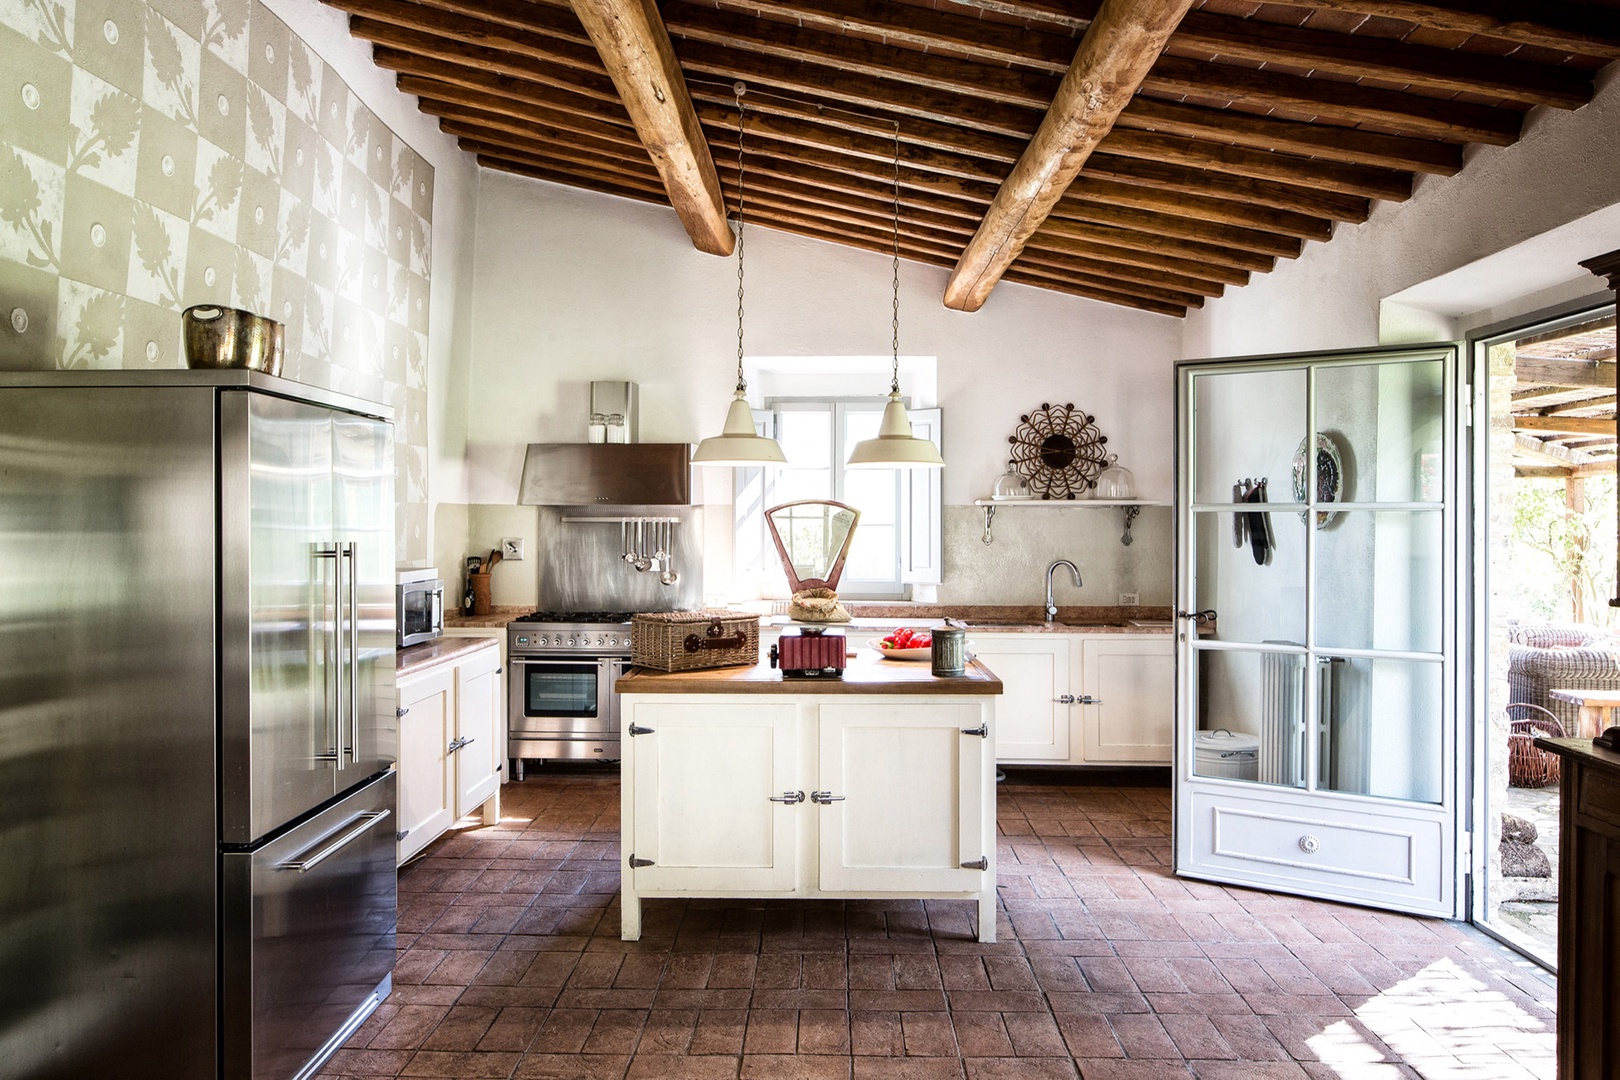 Farm-style kitchen is fully equipped.